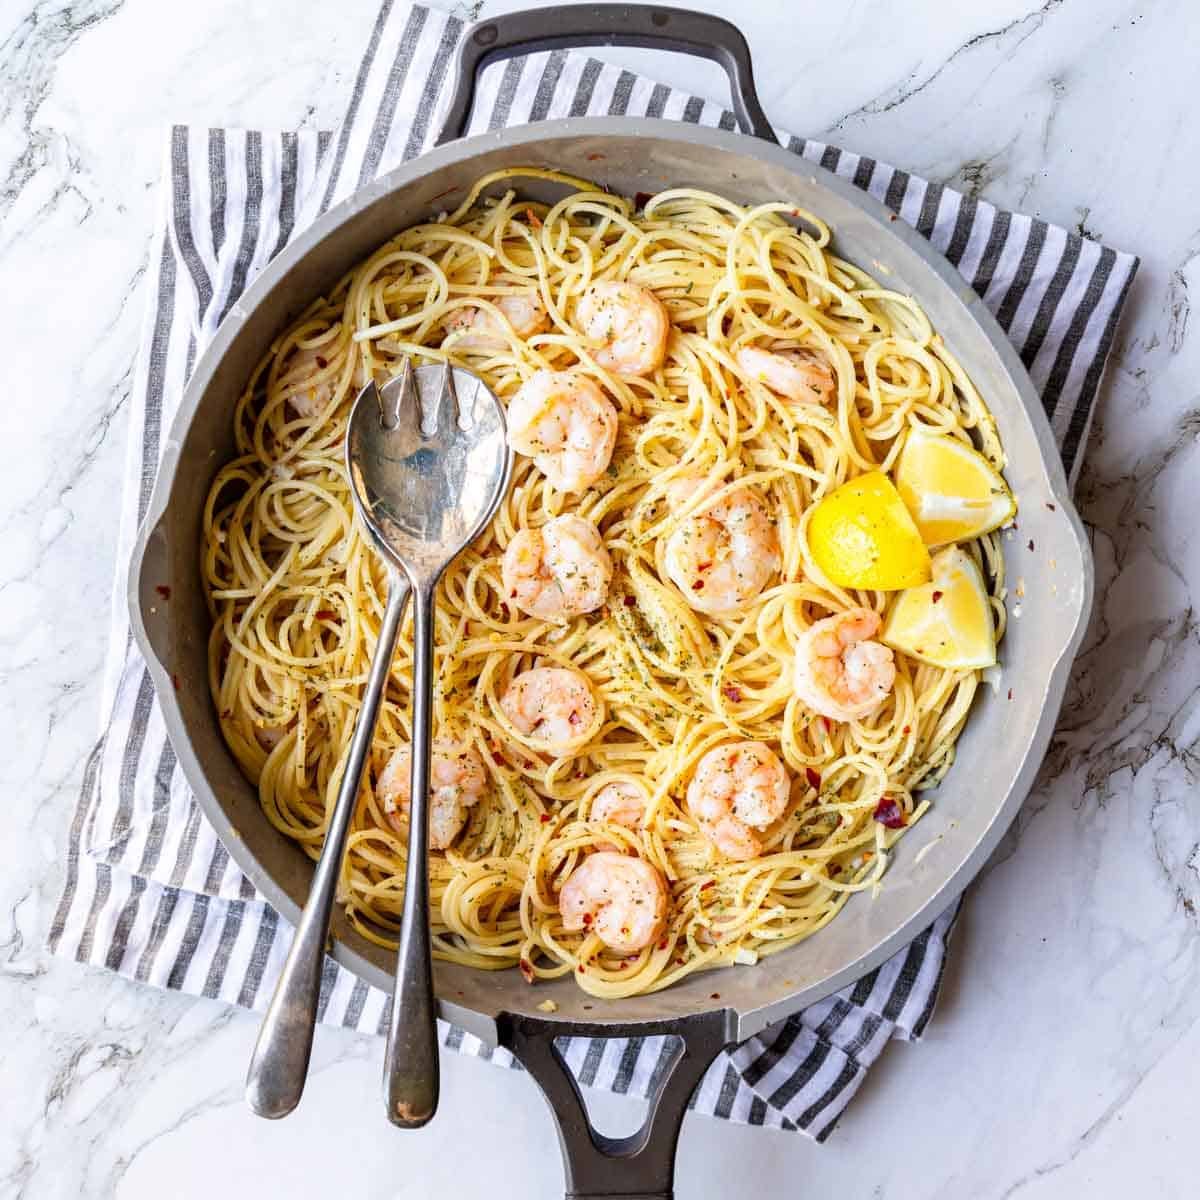 skillet of spaghetti with shrimp and a white wine garlic sauce, two serving spoons and lemon wedges set on top